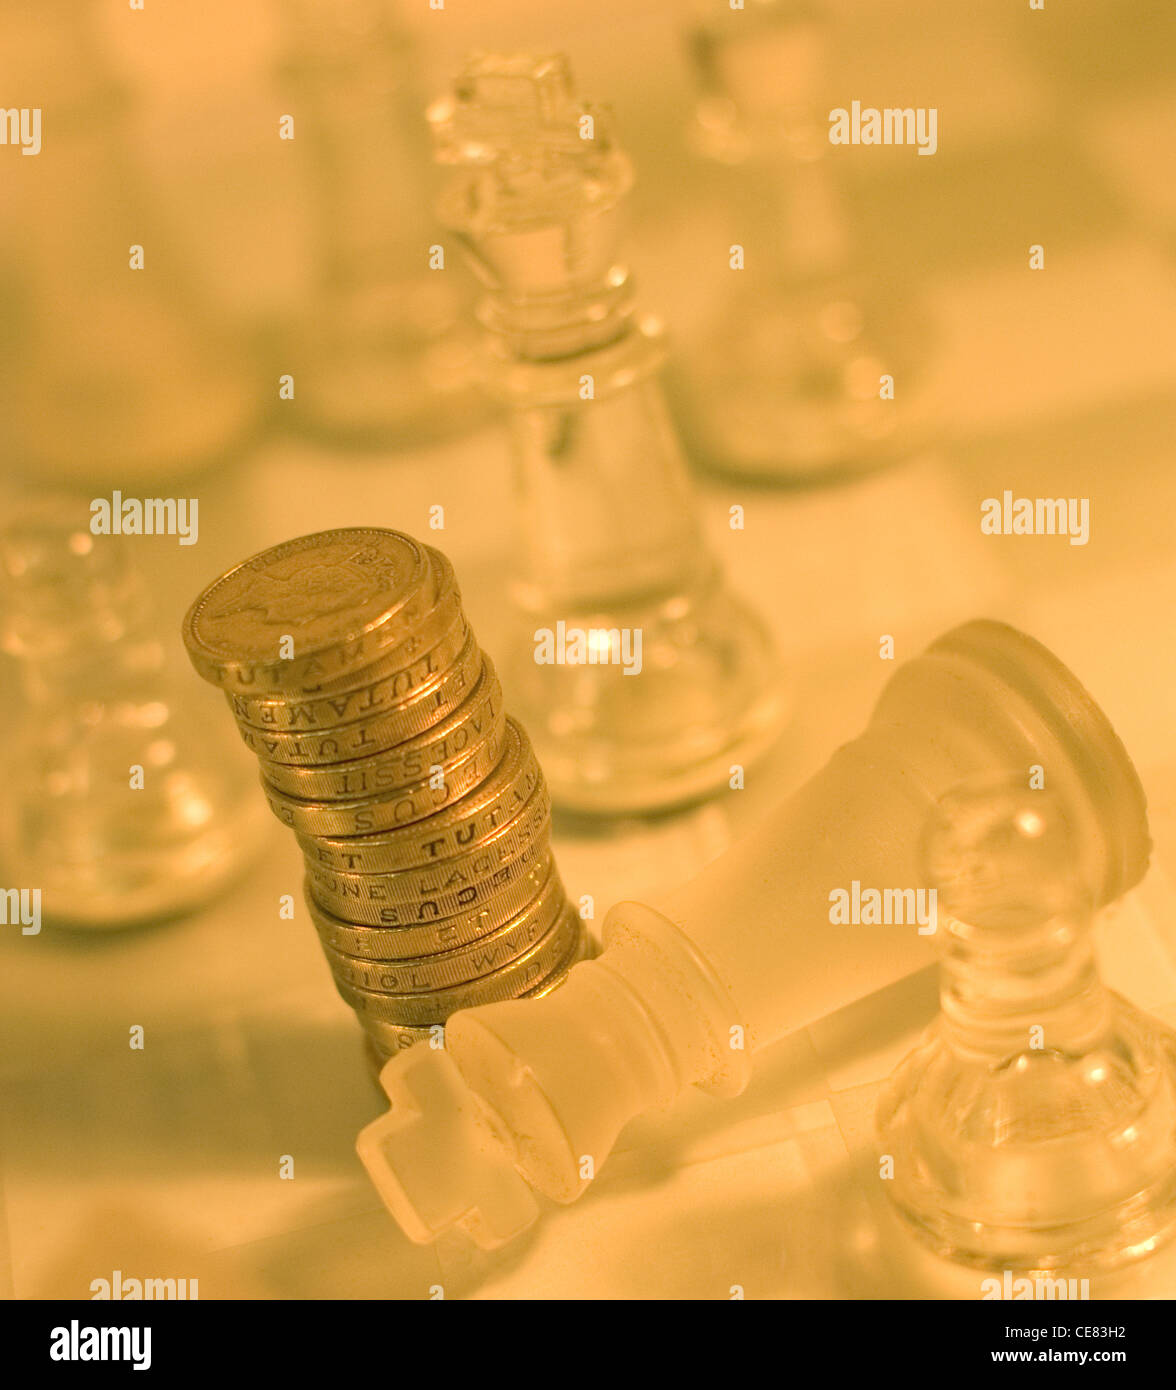 A pile of pound / sterling coins on a chess board surrounded by chess pieces. The image depicts financial,business strategies. Stock Photo